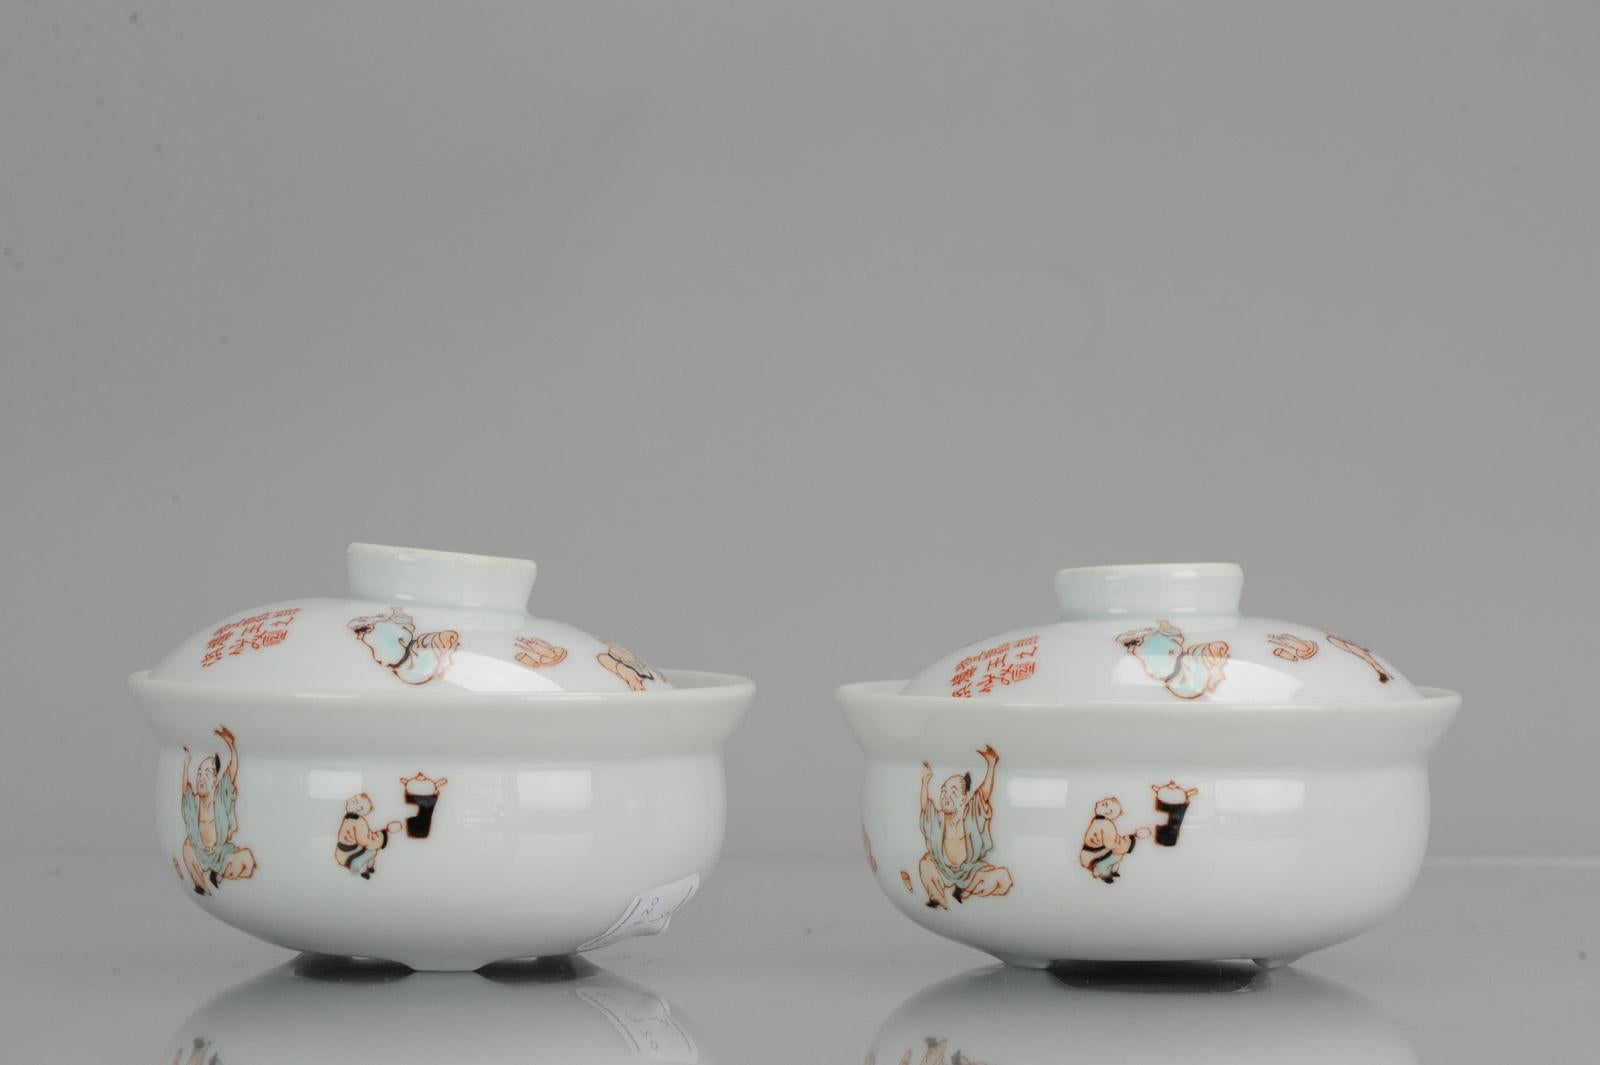 A pair of Chinese porcelain lidded jars, PROC period, painted in red and green enamels

Condition:
Overall condition 1 bowl has a firing flaw to the rim, rest perfect. Size: Approximate 143mm diameter

Period:
20th century PRoC (1949-now).
   